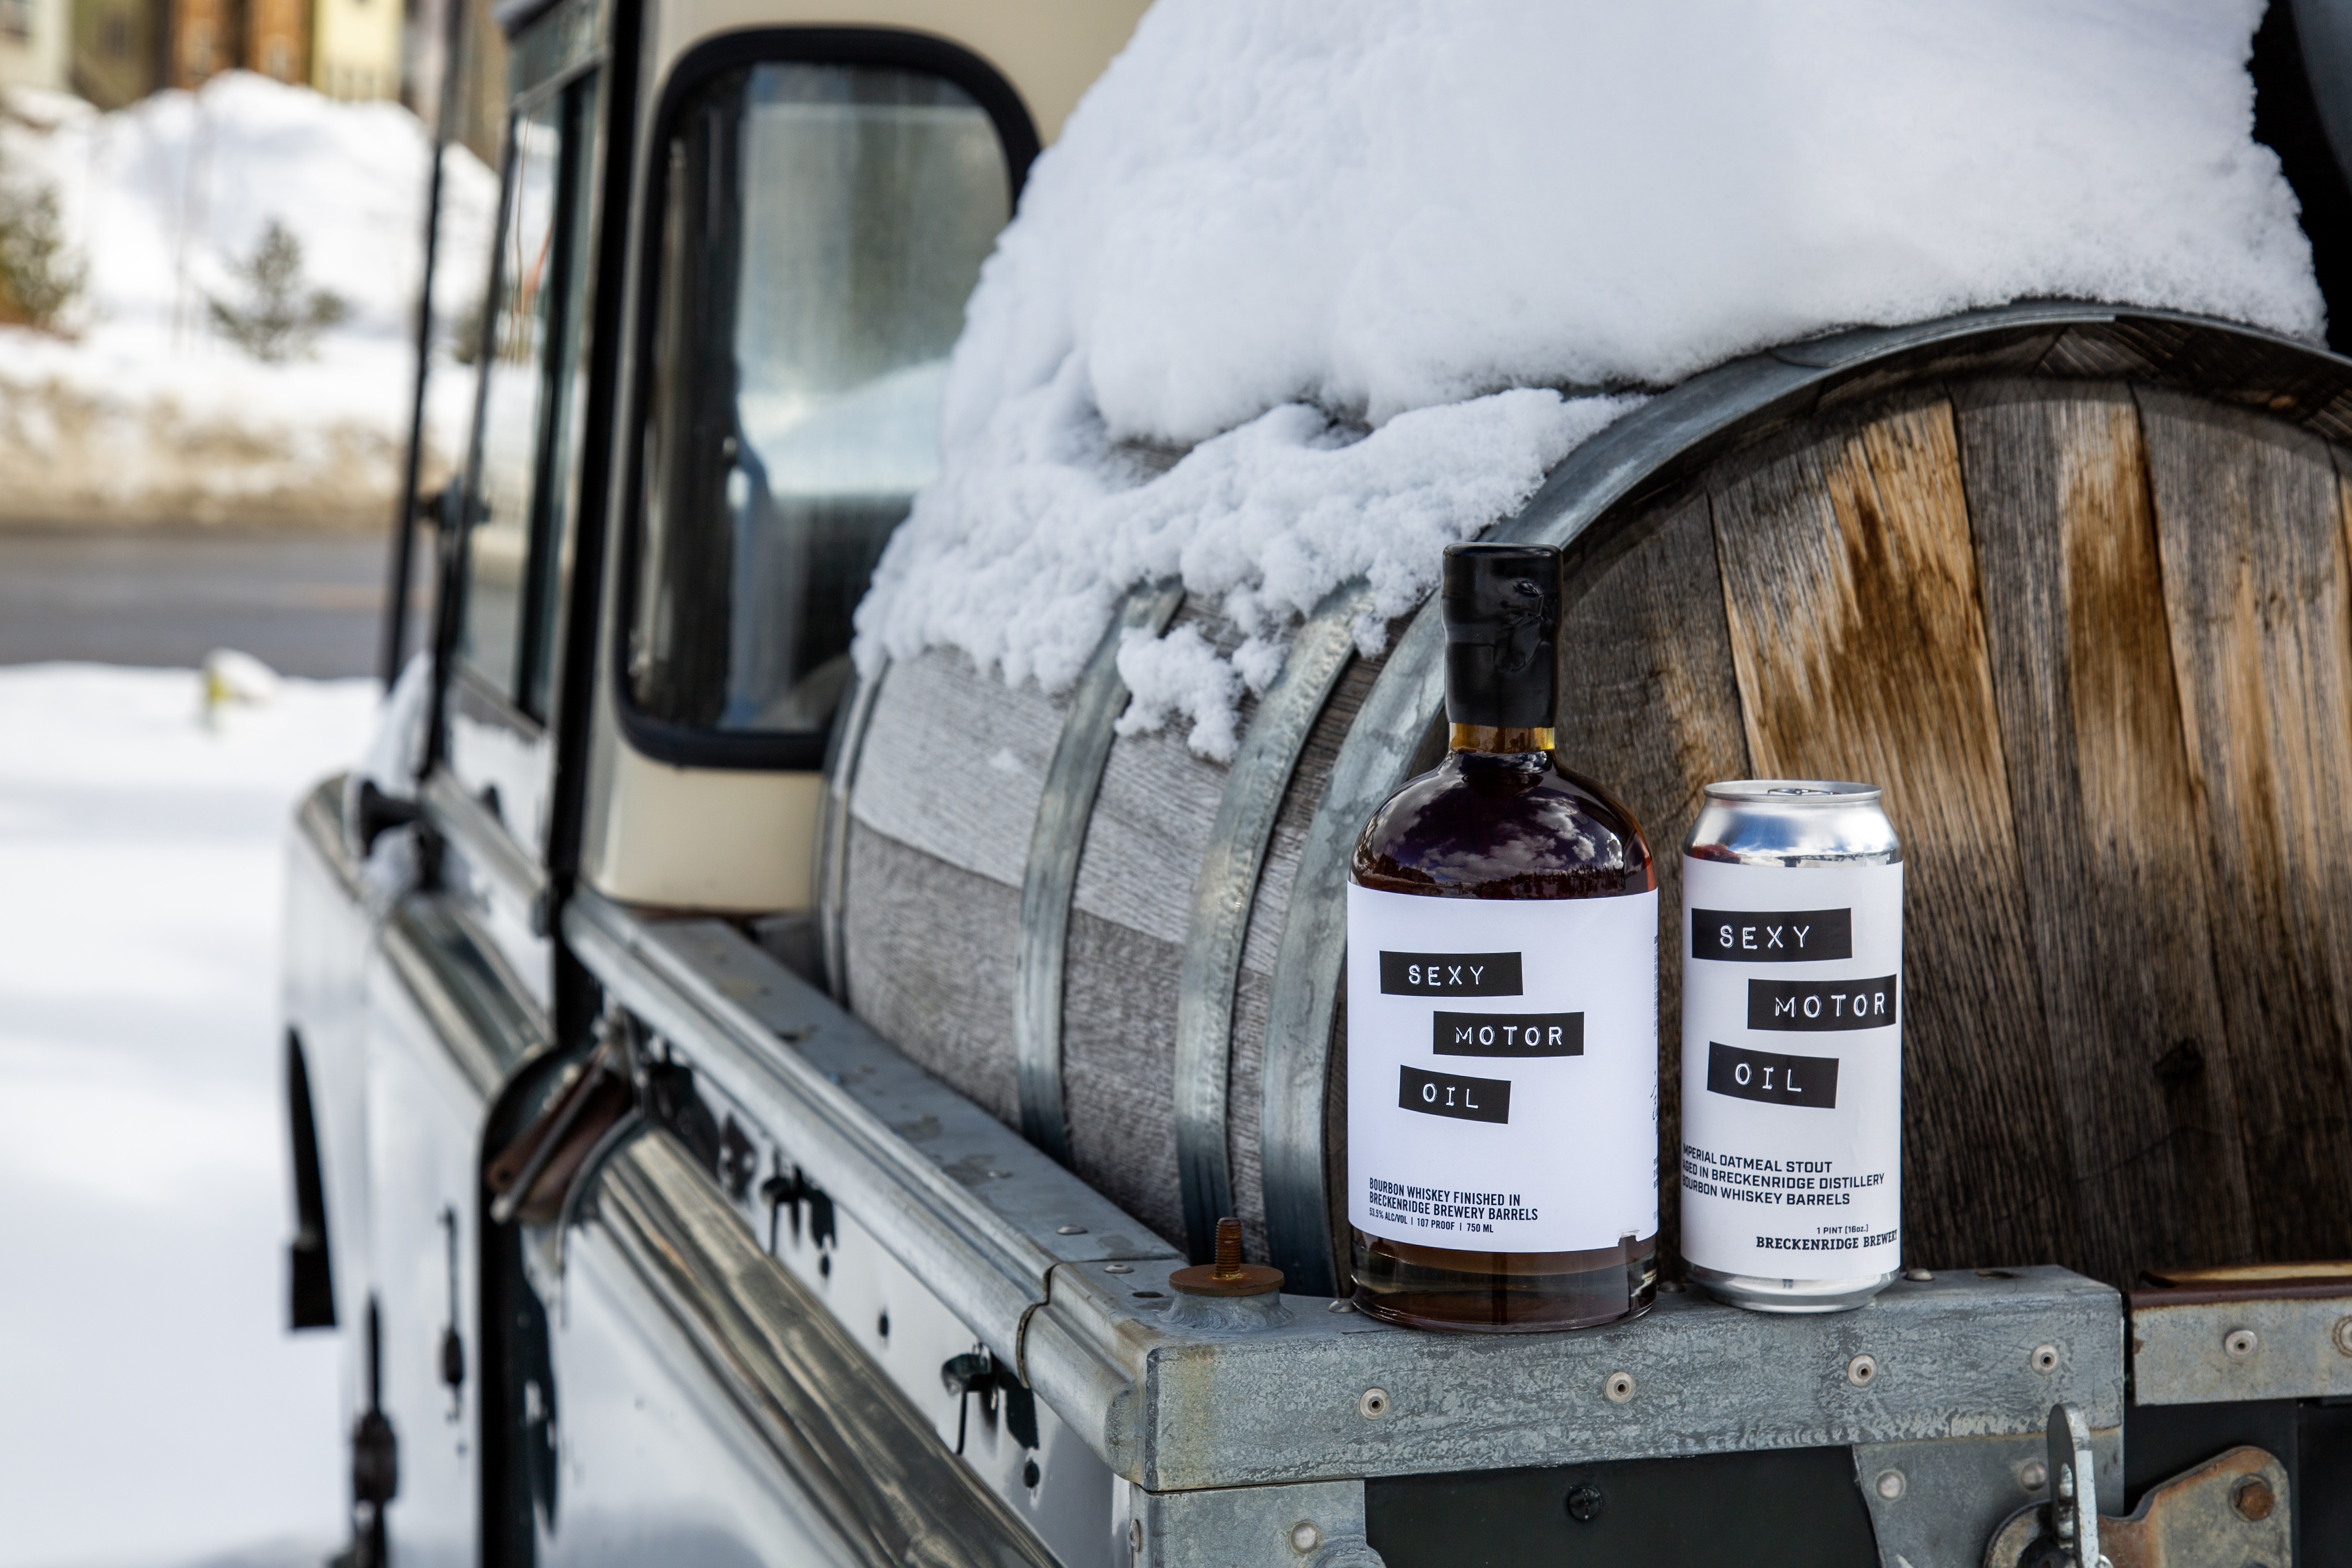 Limited-Edition Sexy Motor Oil Whiskey and Beer Collaboration Now Available Exclusively at Breckenridge Distillery and Breckenridge Brewery Locations in Colorado Starting on Valentine’s Day